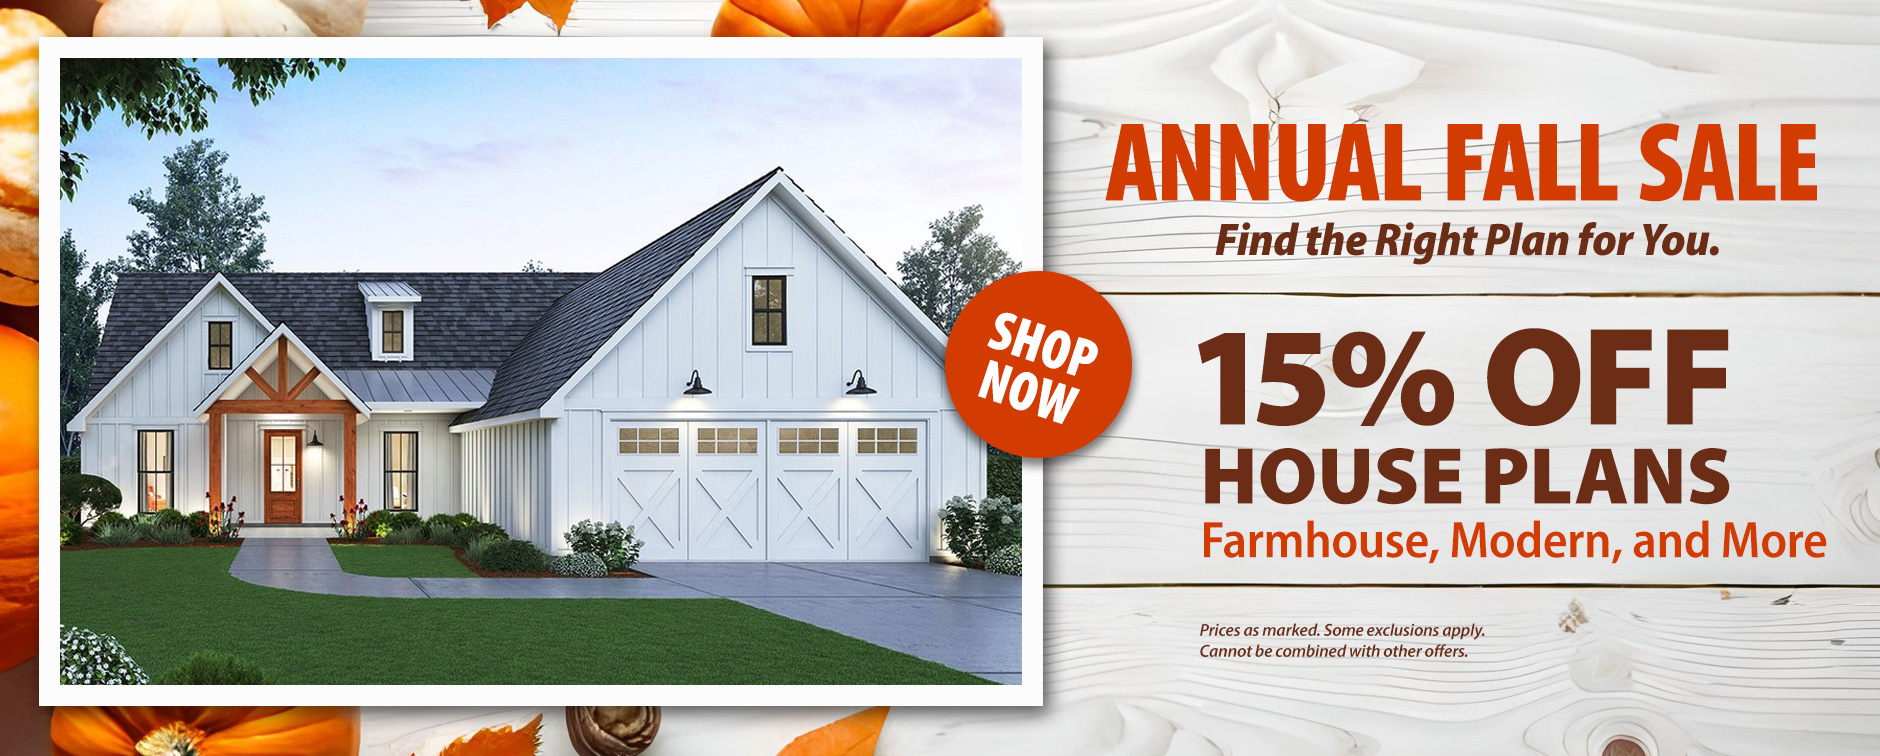 Shop Now & Take 15% Off House Plans